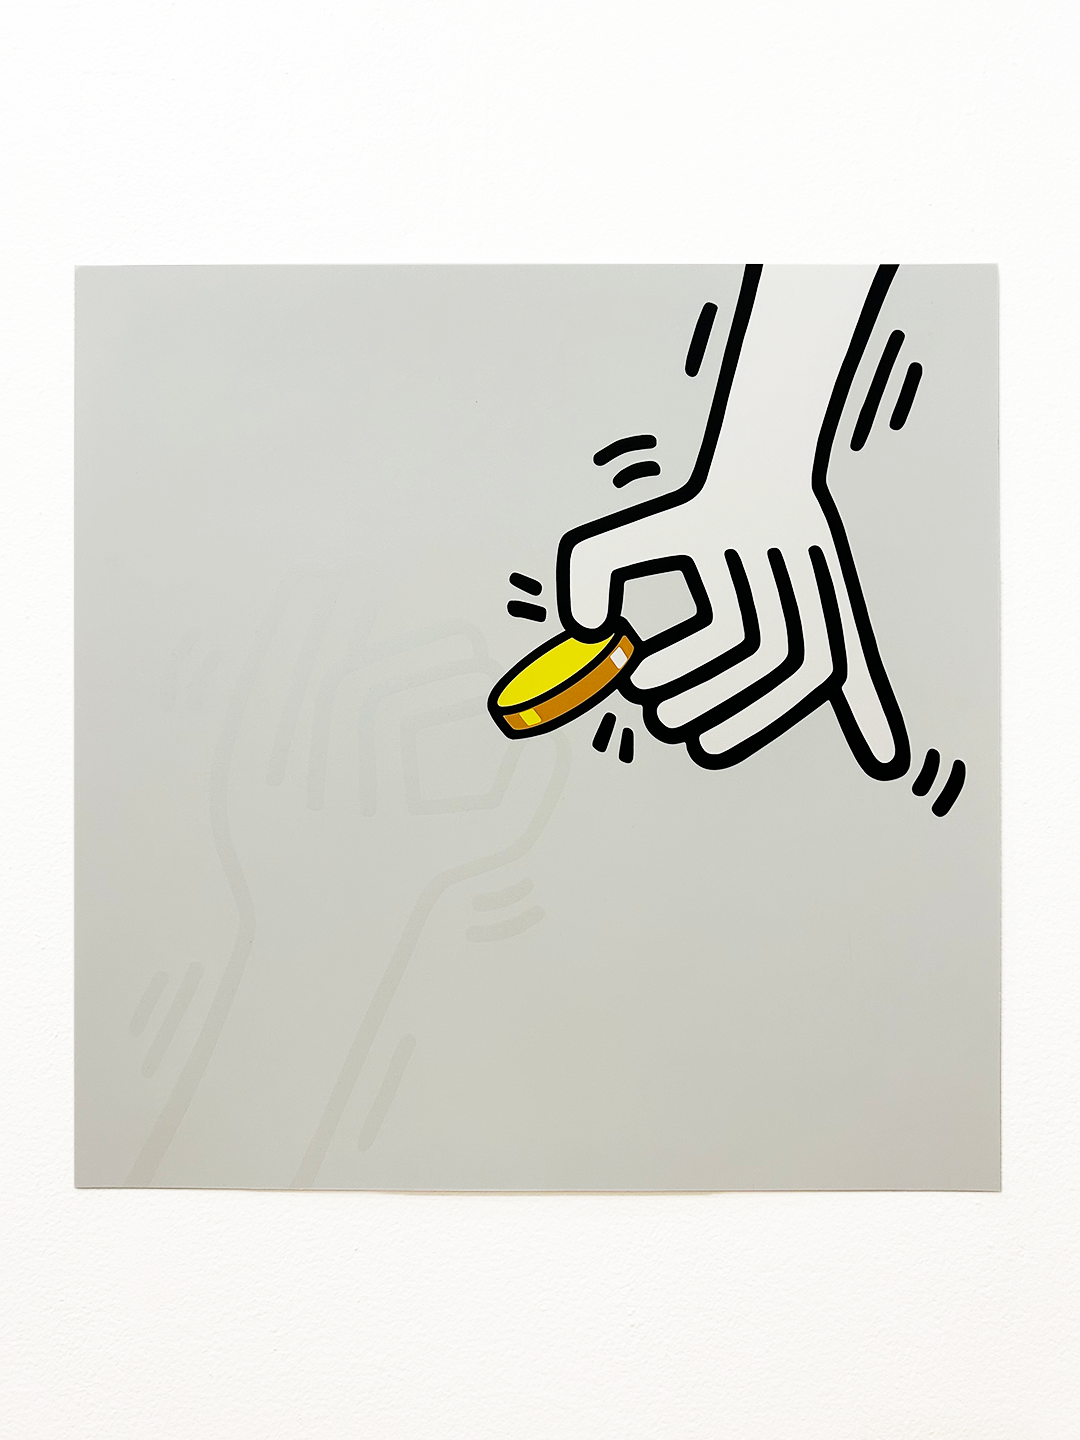 1 Gold Coin "The Invisible Hand K.H." by E.LEE